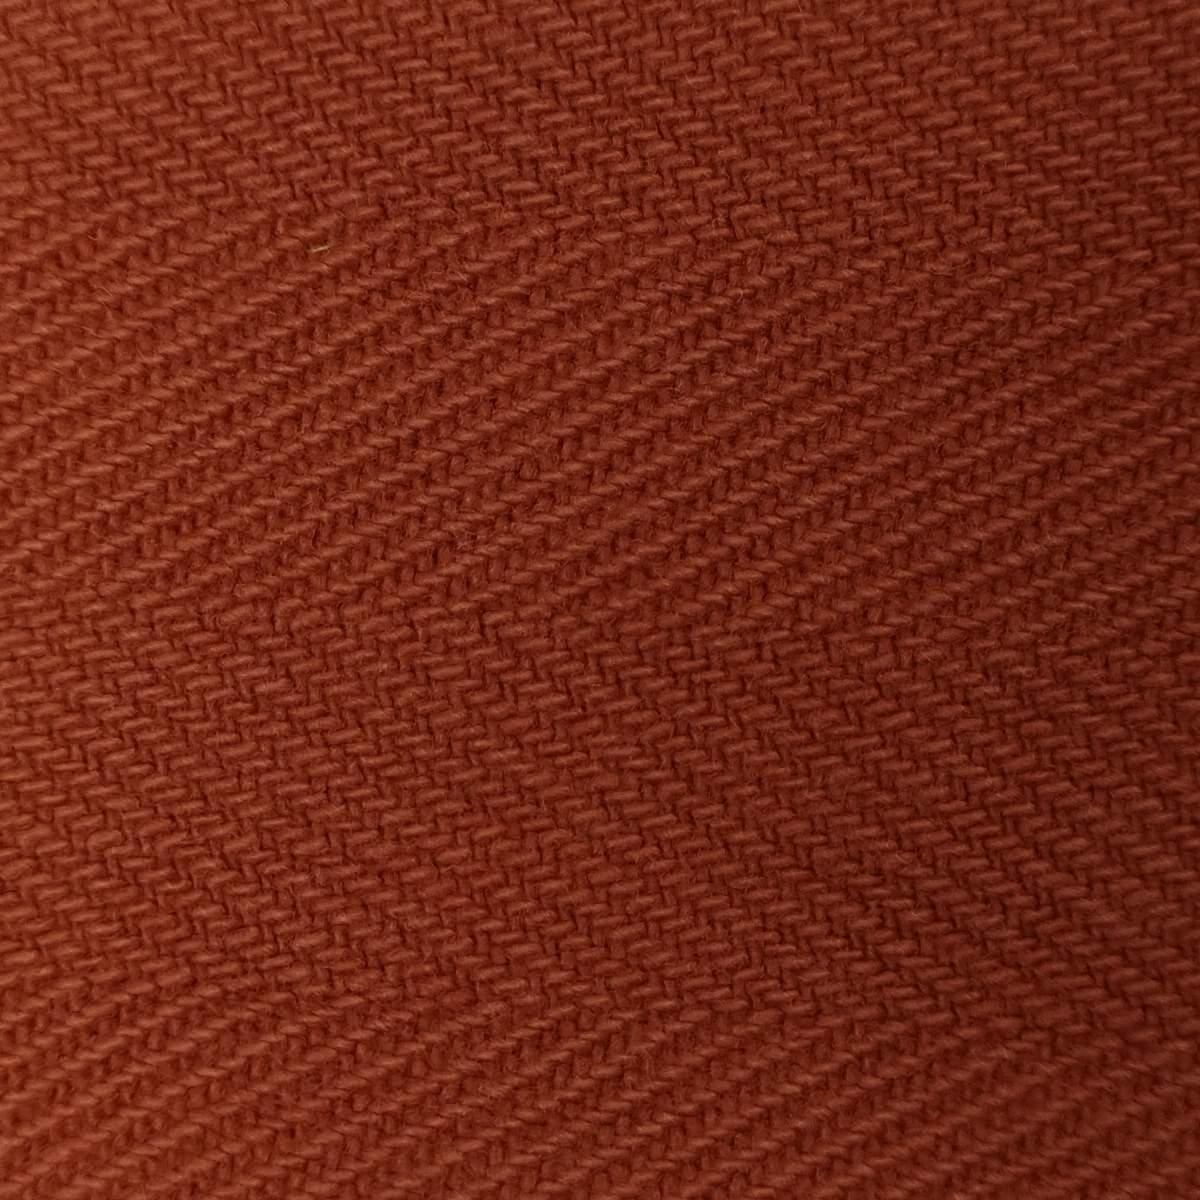 5'S Herringbone Cotton Woven Fabric-Red Stage